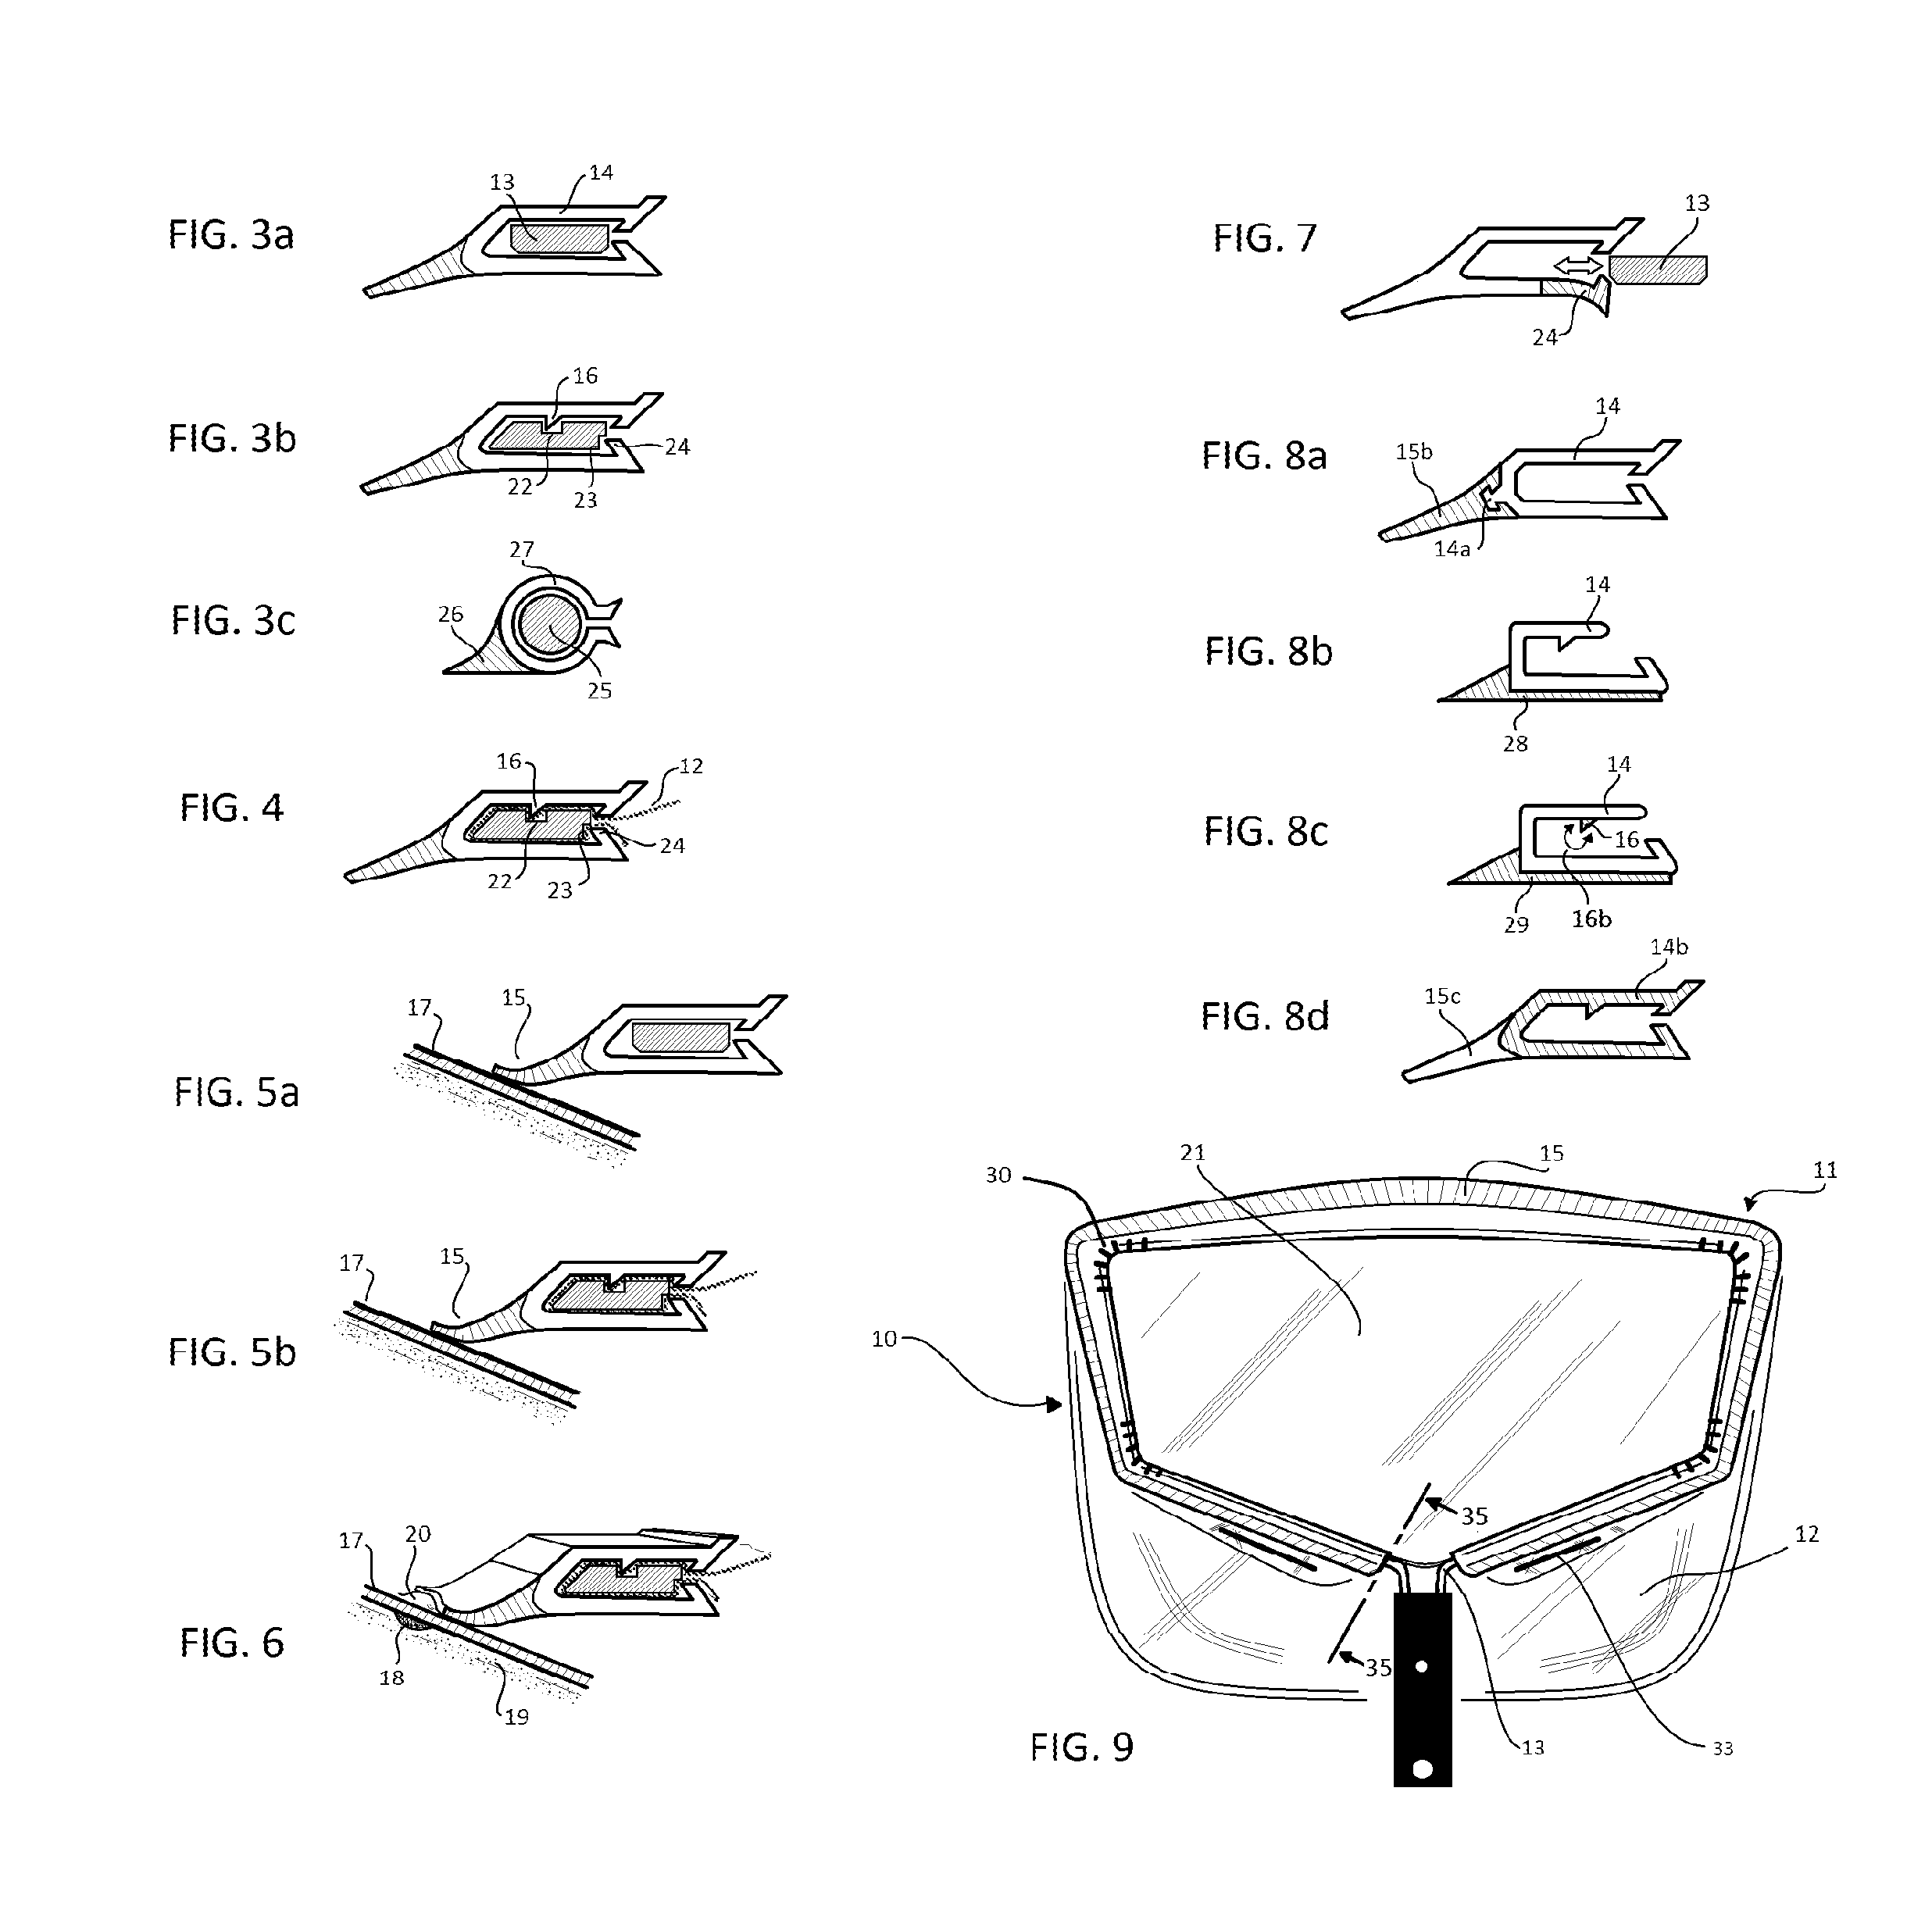 Pool cleaning apparatus and related methods